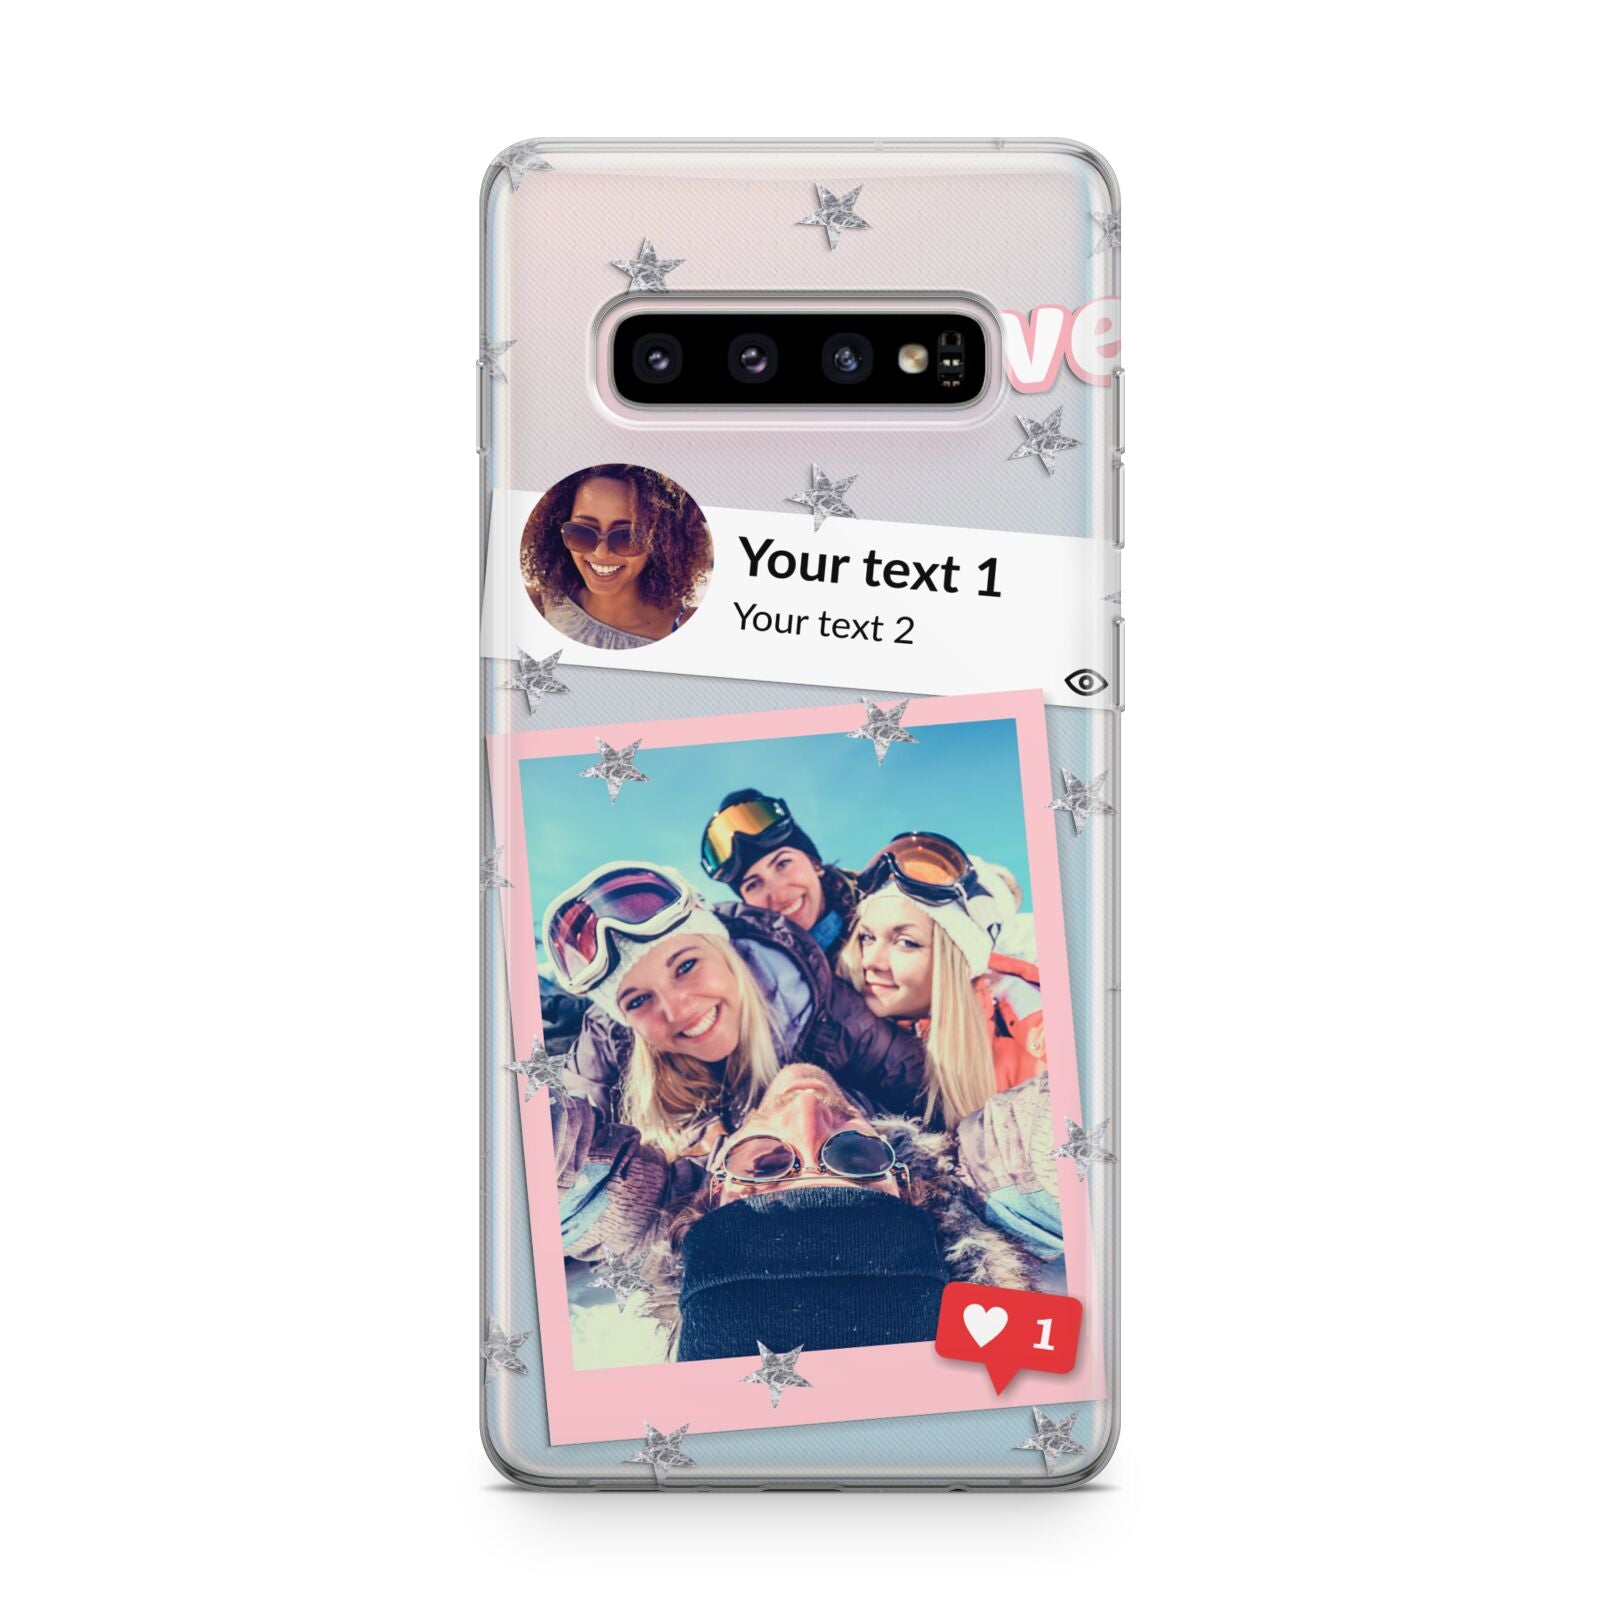 Starry Social Media Photo Montage Upload with Text Samsung Galaxy S10 Plus Case